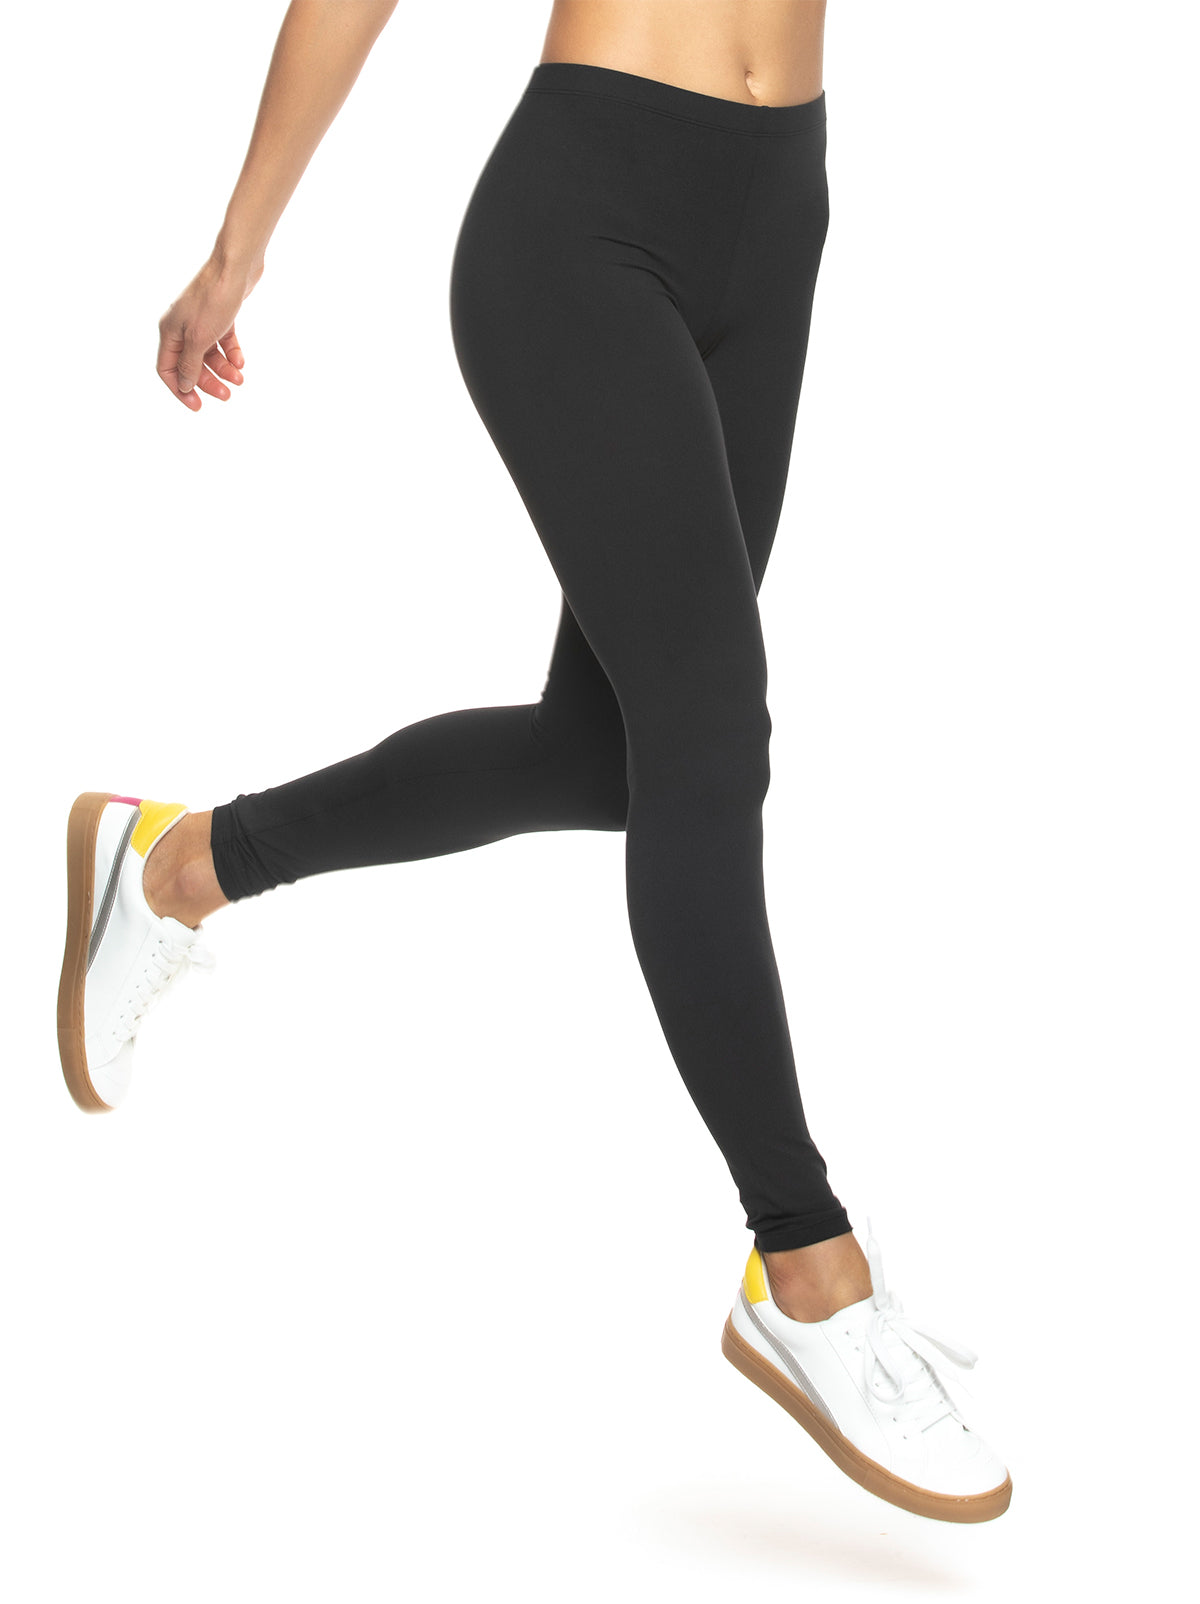 Felina Sueded Athleisure Performance Legging (2-Pack) Womens Leggings  w/Slimming Waist Band Style: C3690RT (Large, Sparrow)